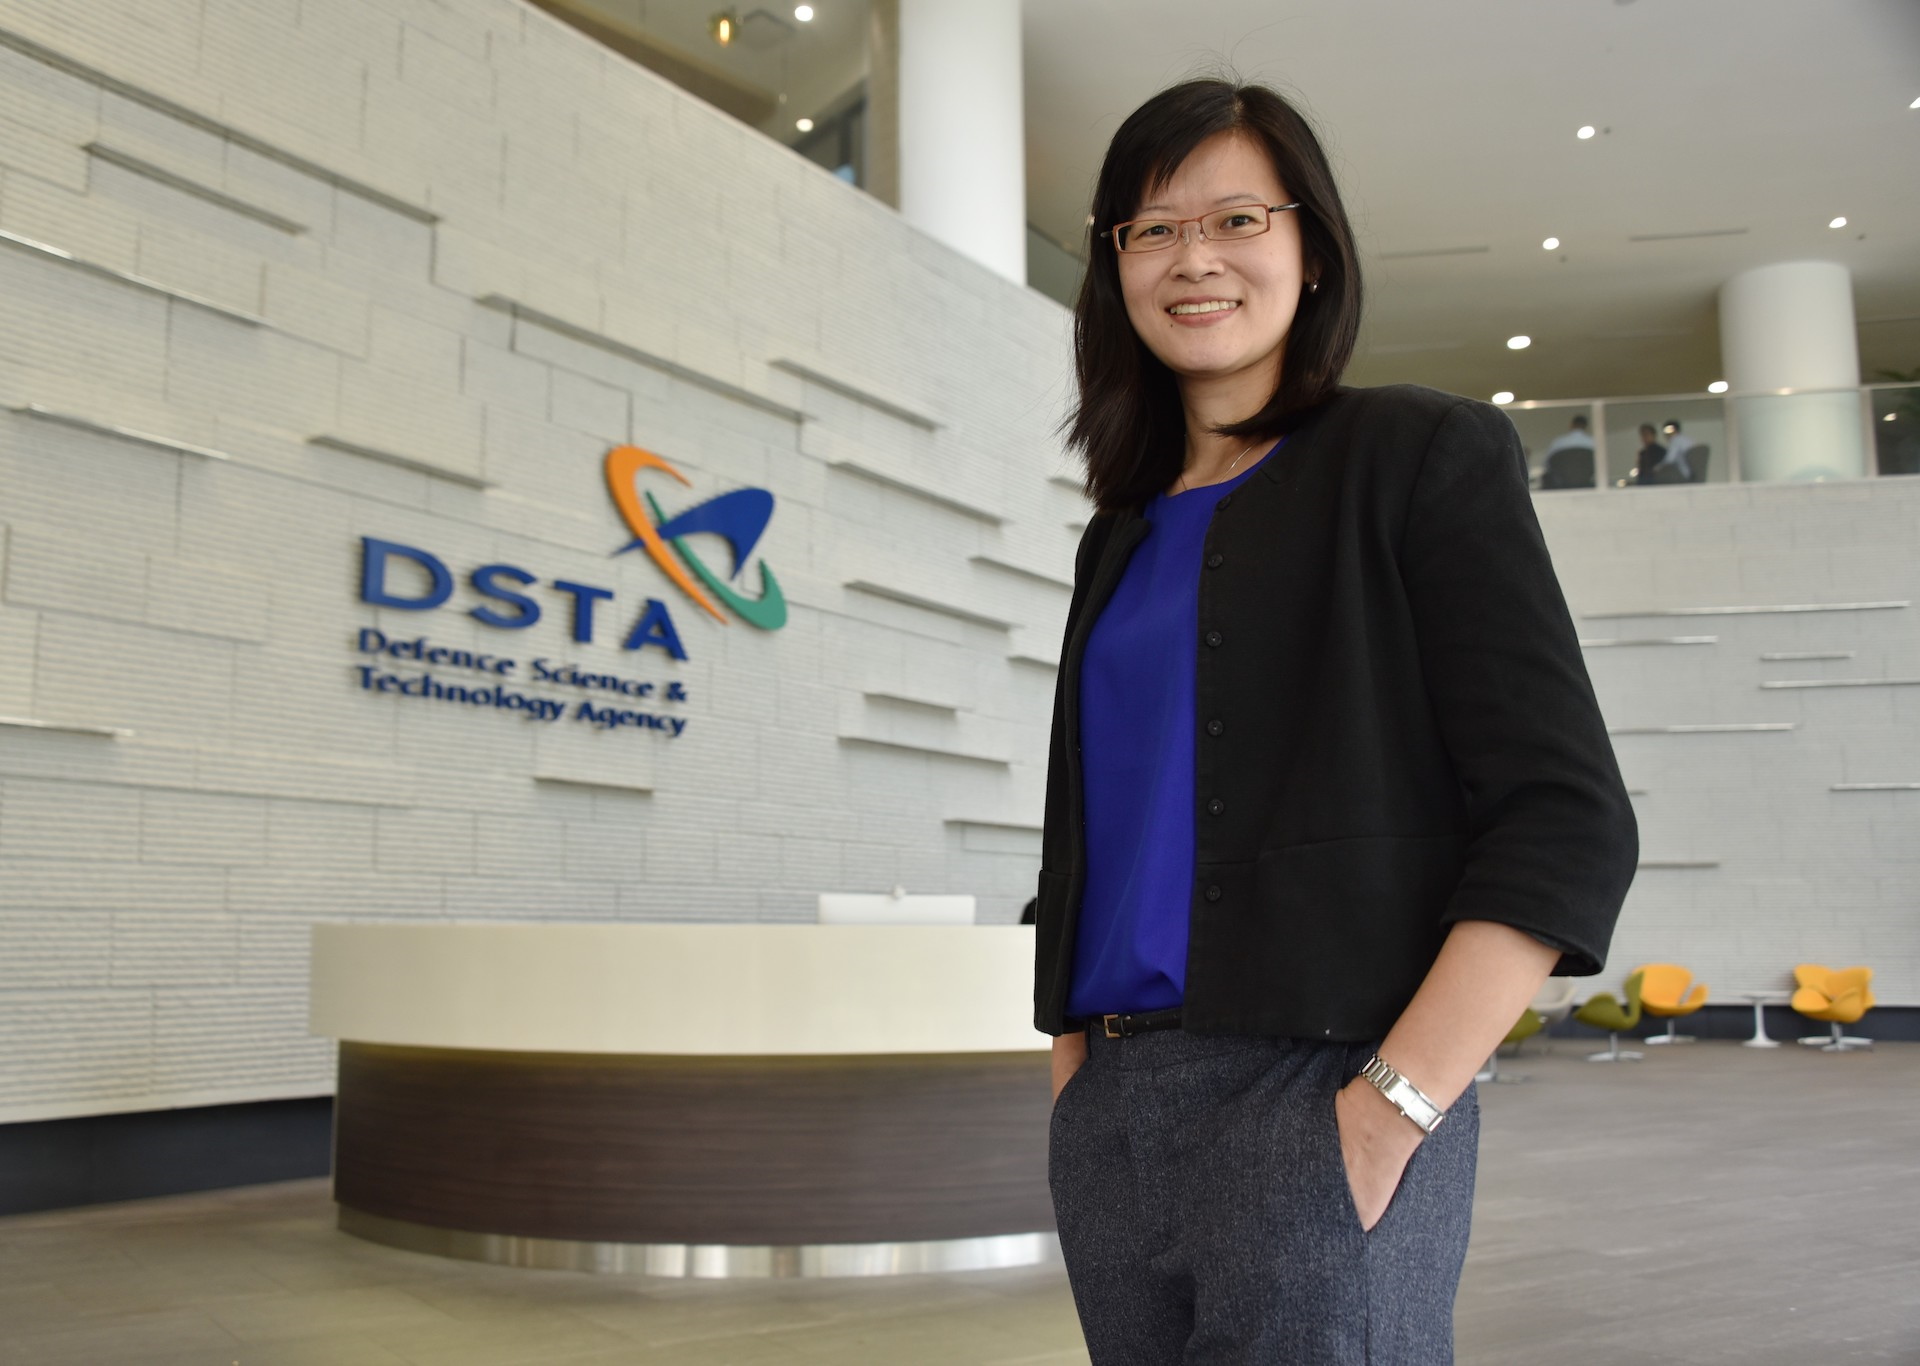 She's a leader in Spore's defence tech community